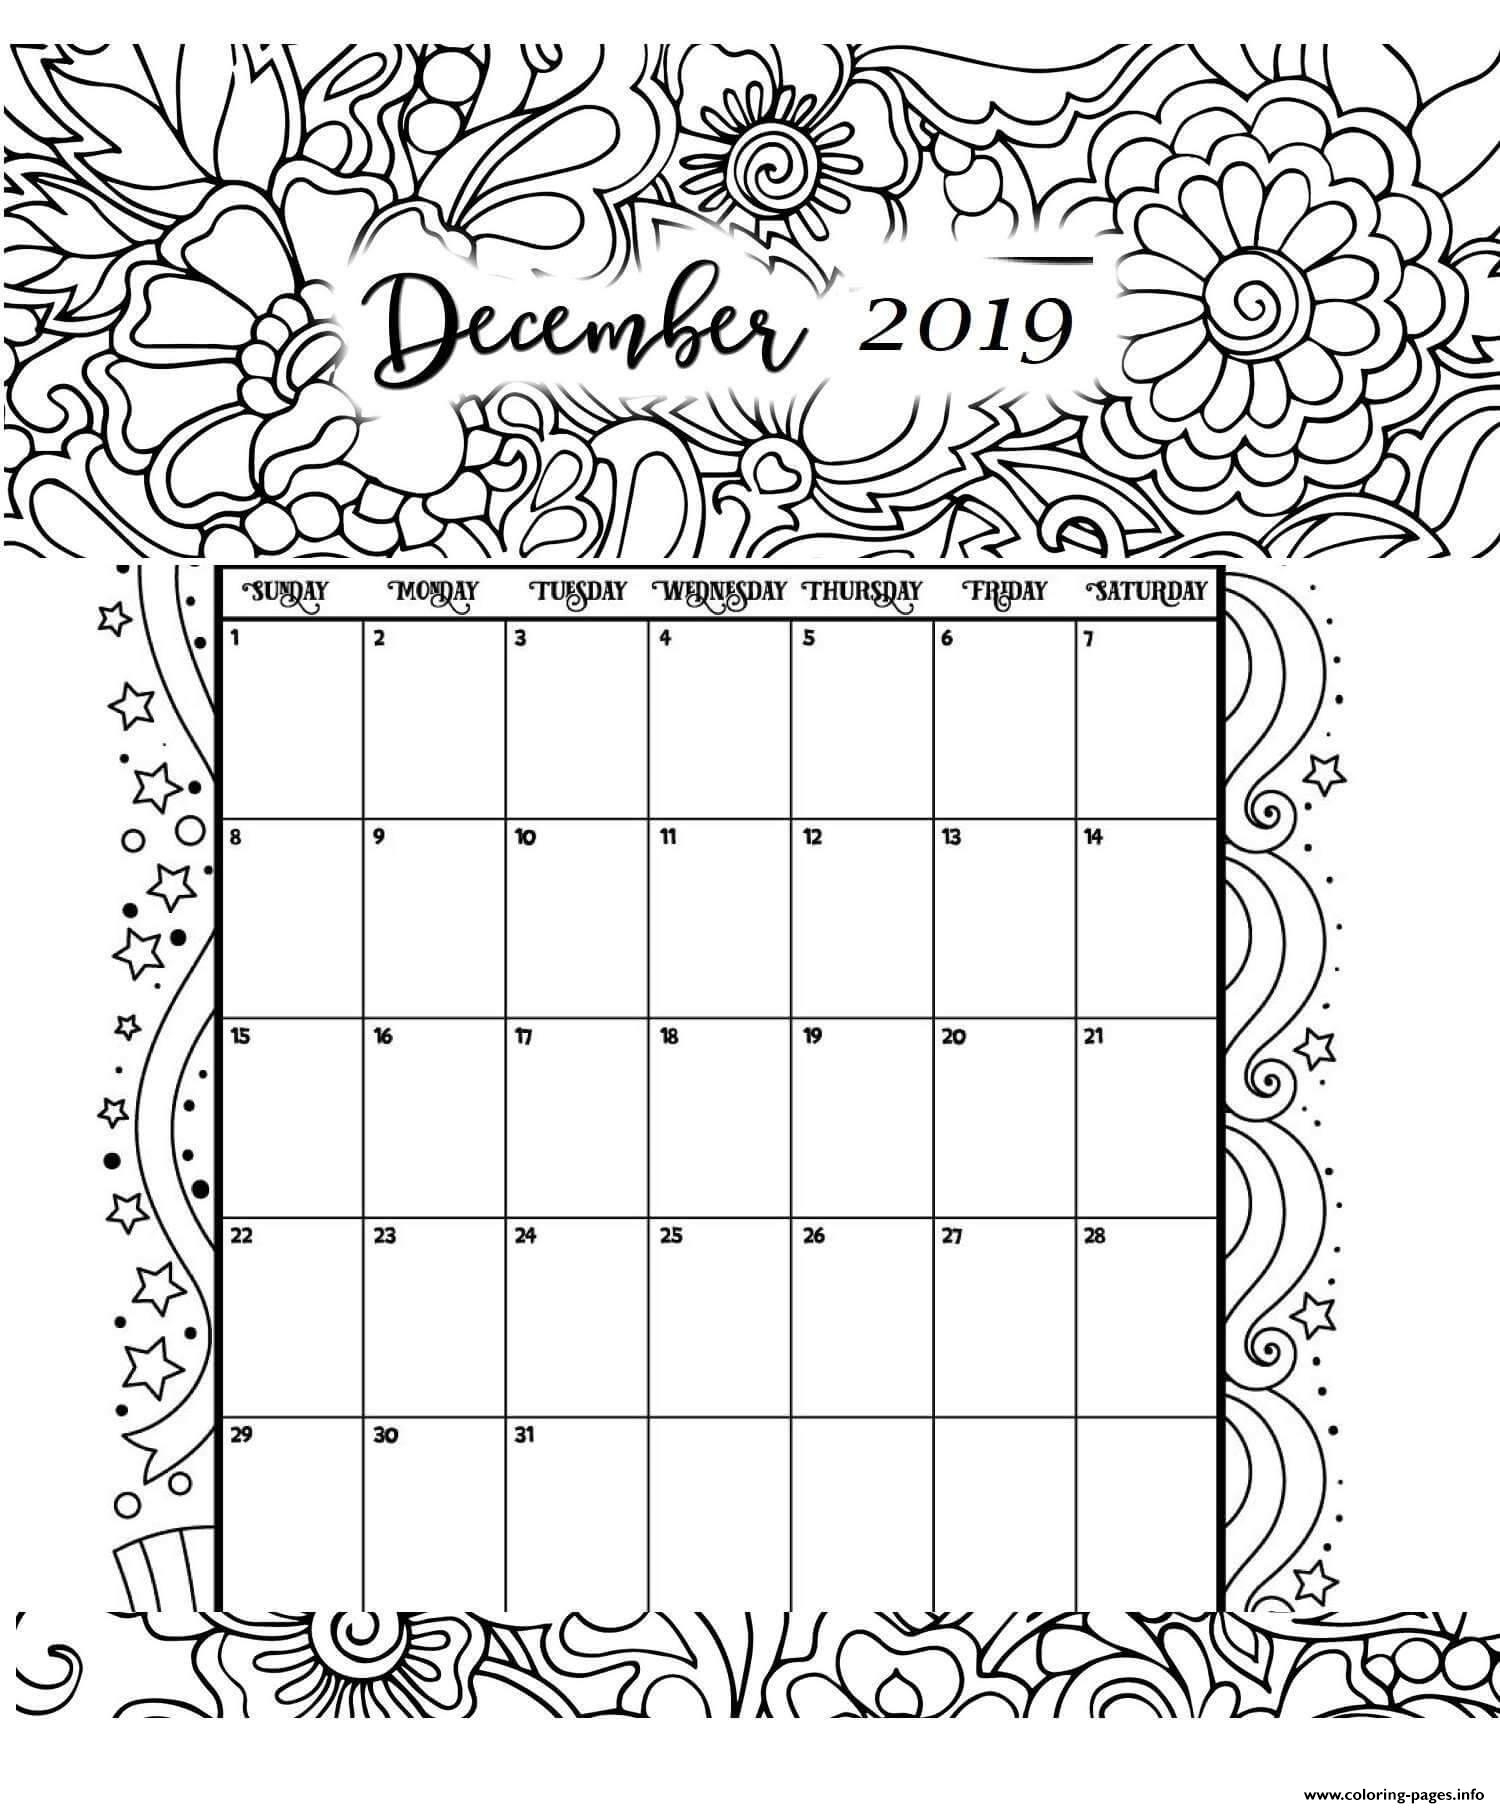 December Calendar 2019 Coloring Pages Printable